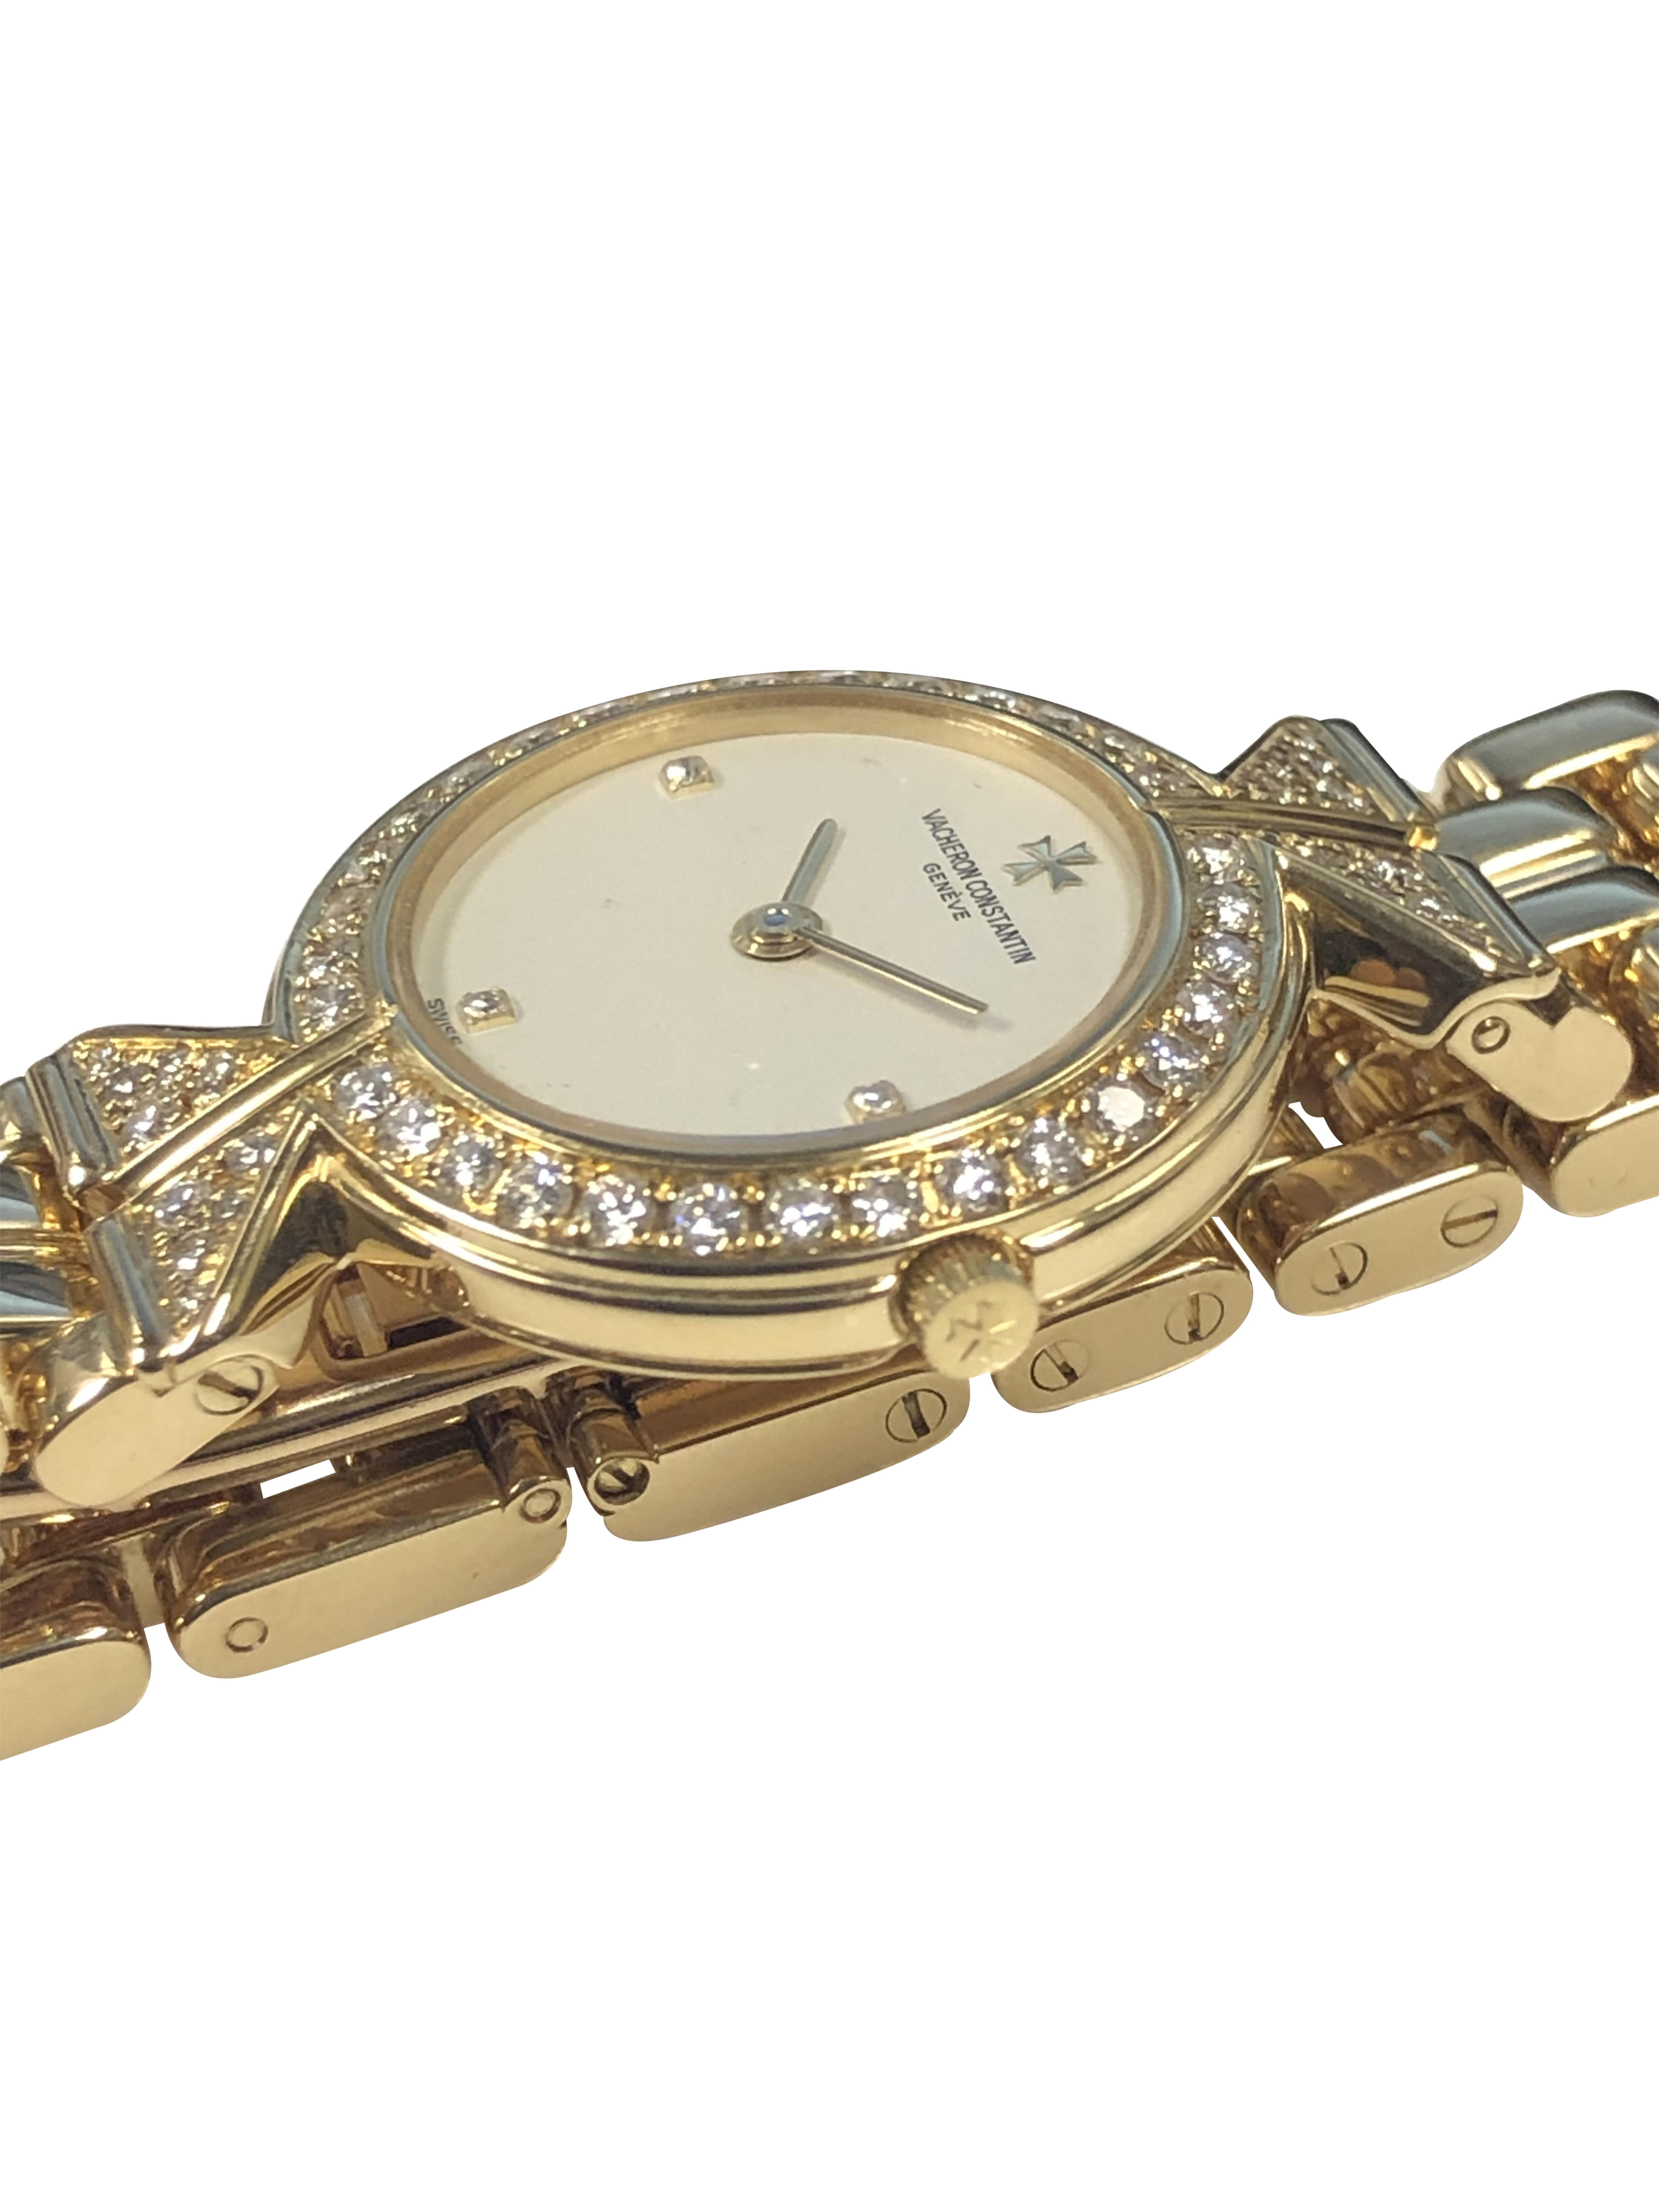 Circa 2005 Vacheron & Constantin Malta collection Ladies Wrist Watch, 23 M.M. 18k Yellow Gold 2 piece water resistant case with a bezel of Round Brilliant cut Diamonds totaling 1.20 Carats. Quartz movement, White dial with Diamond set markers.1/2